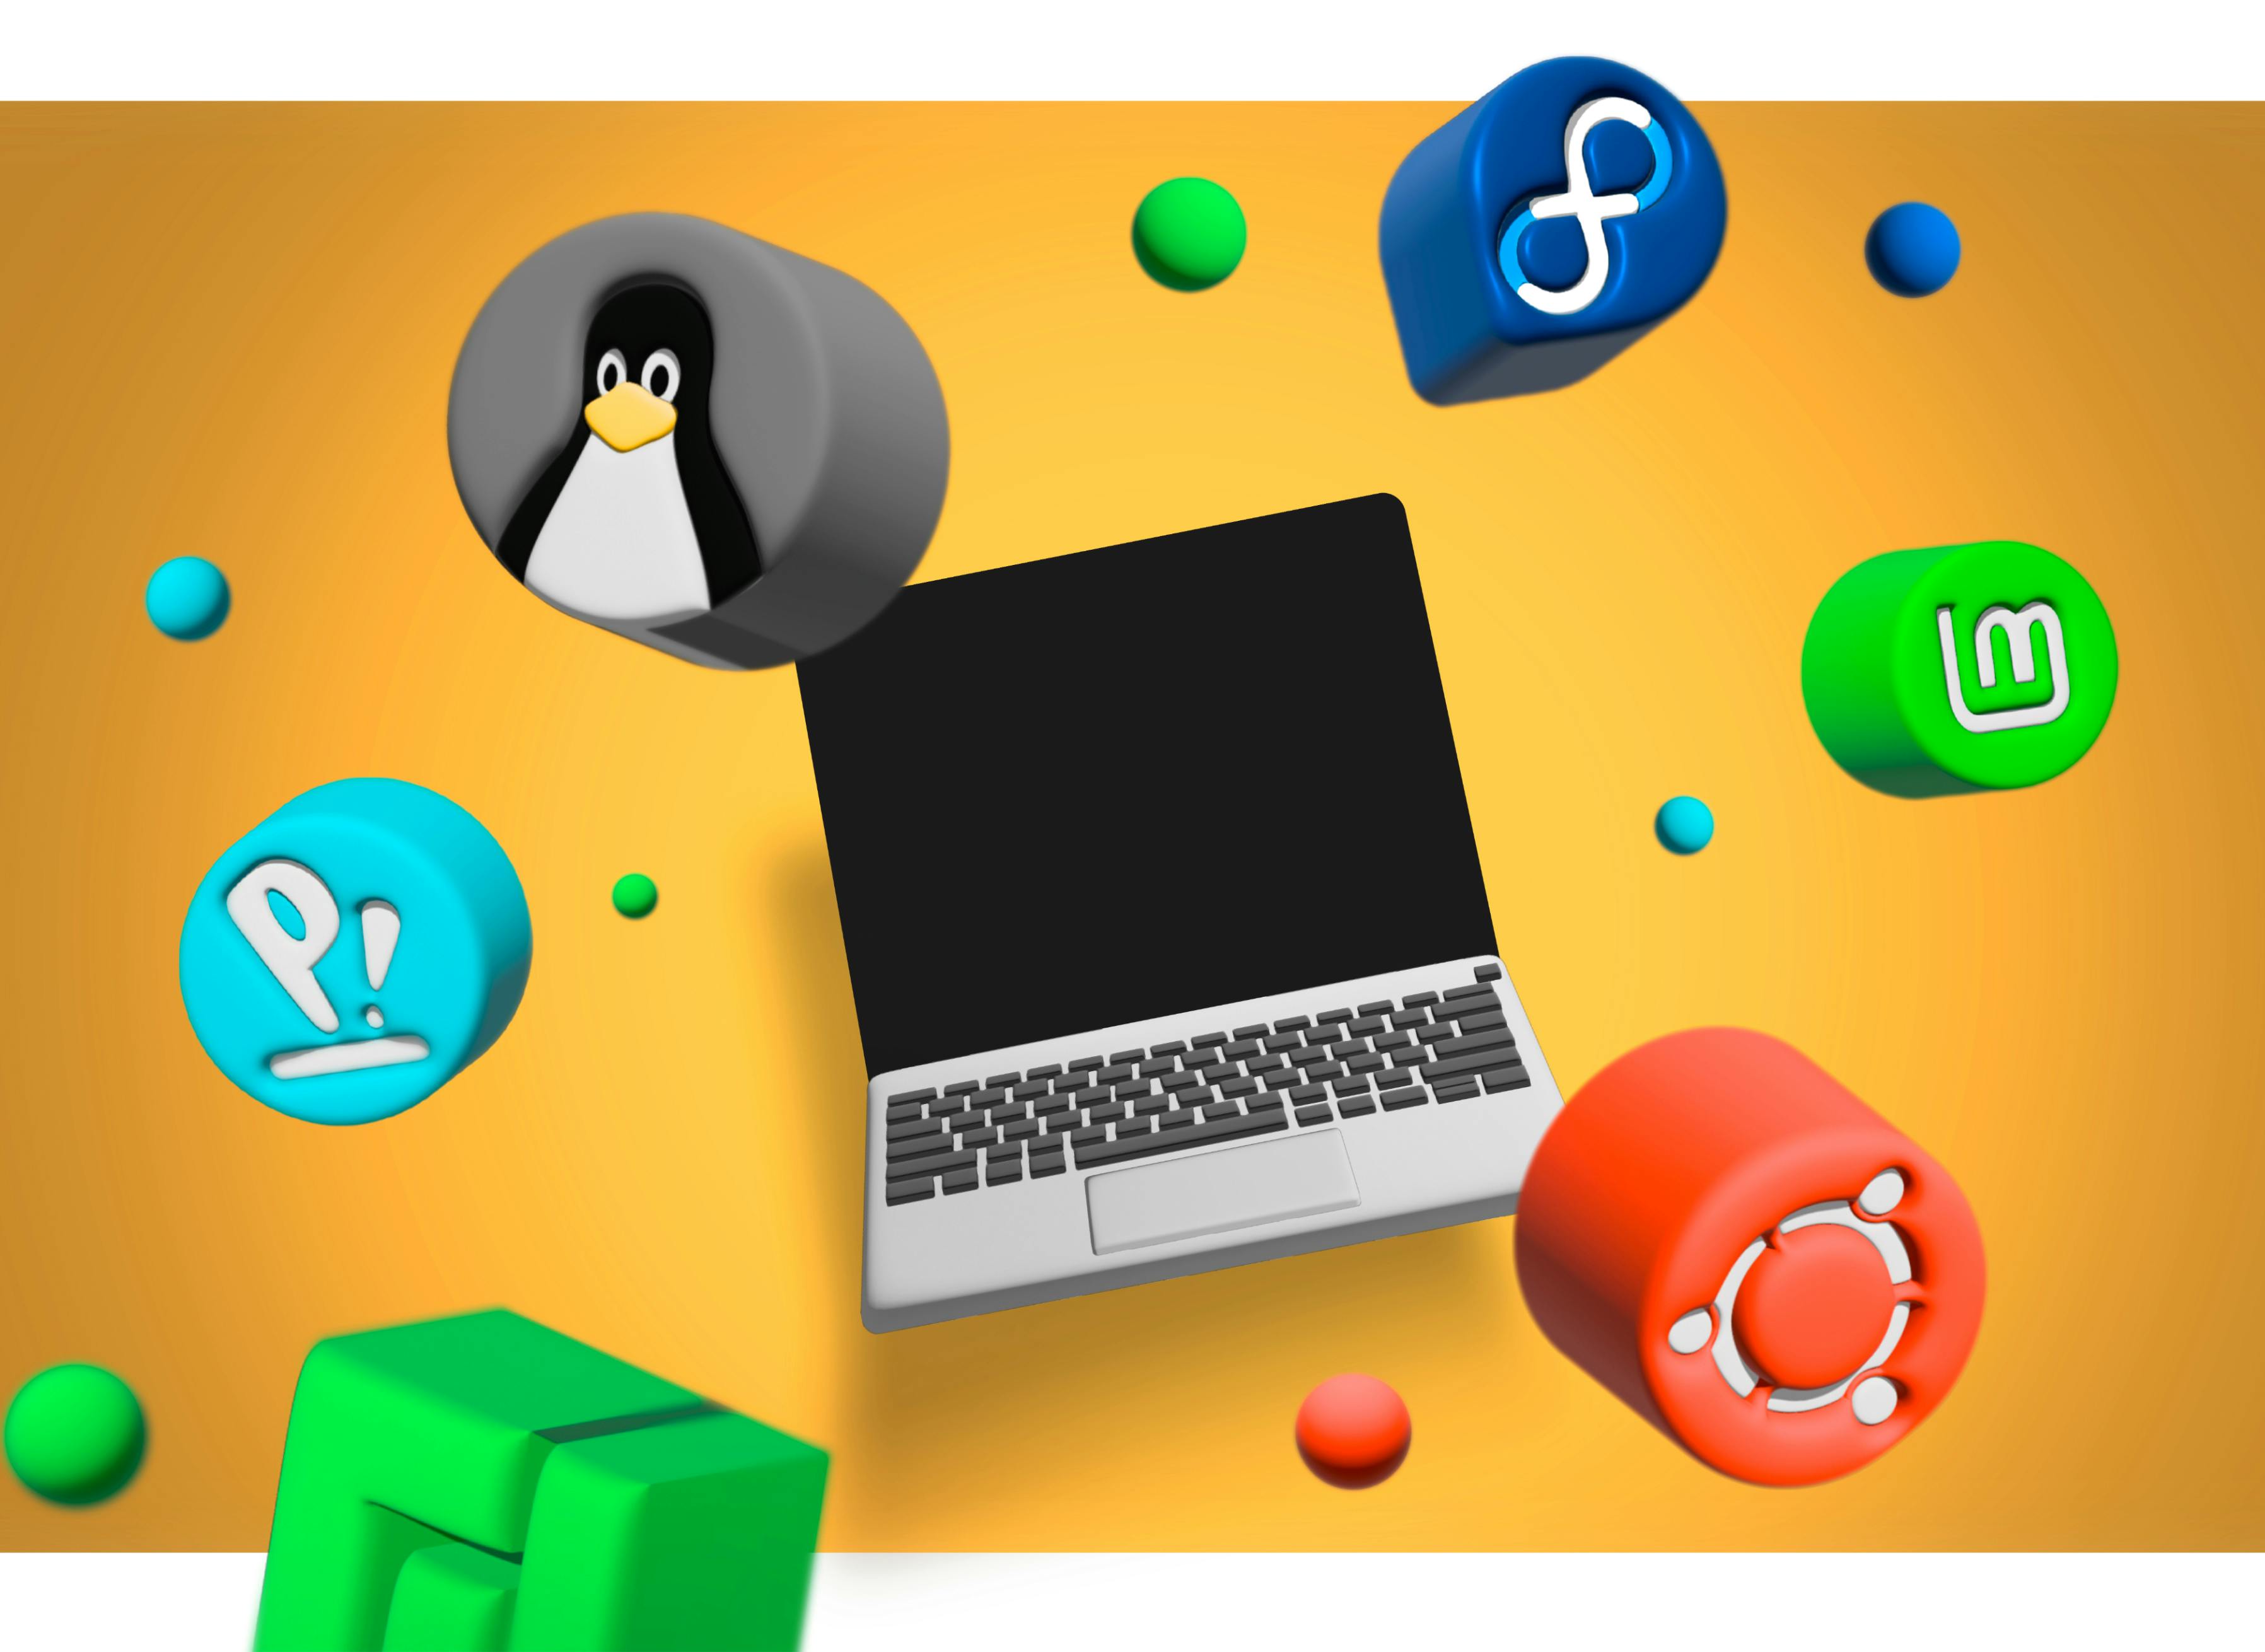 Framework Laptop is compatible with many Linux distros